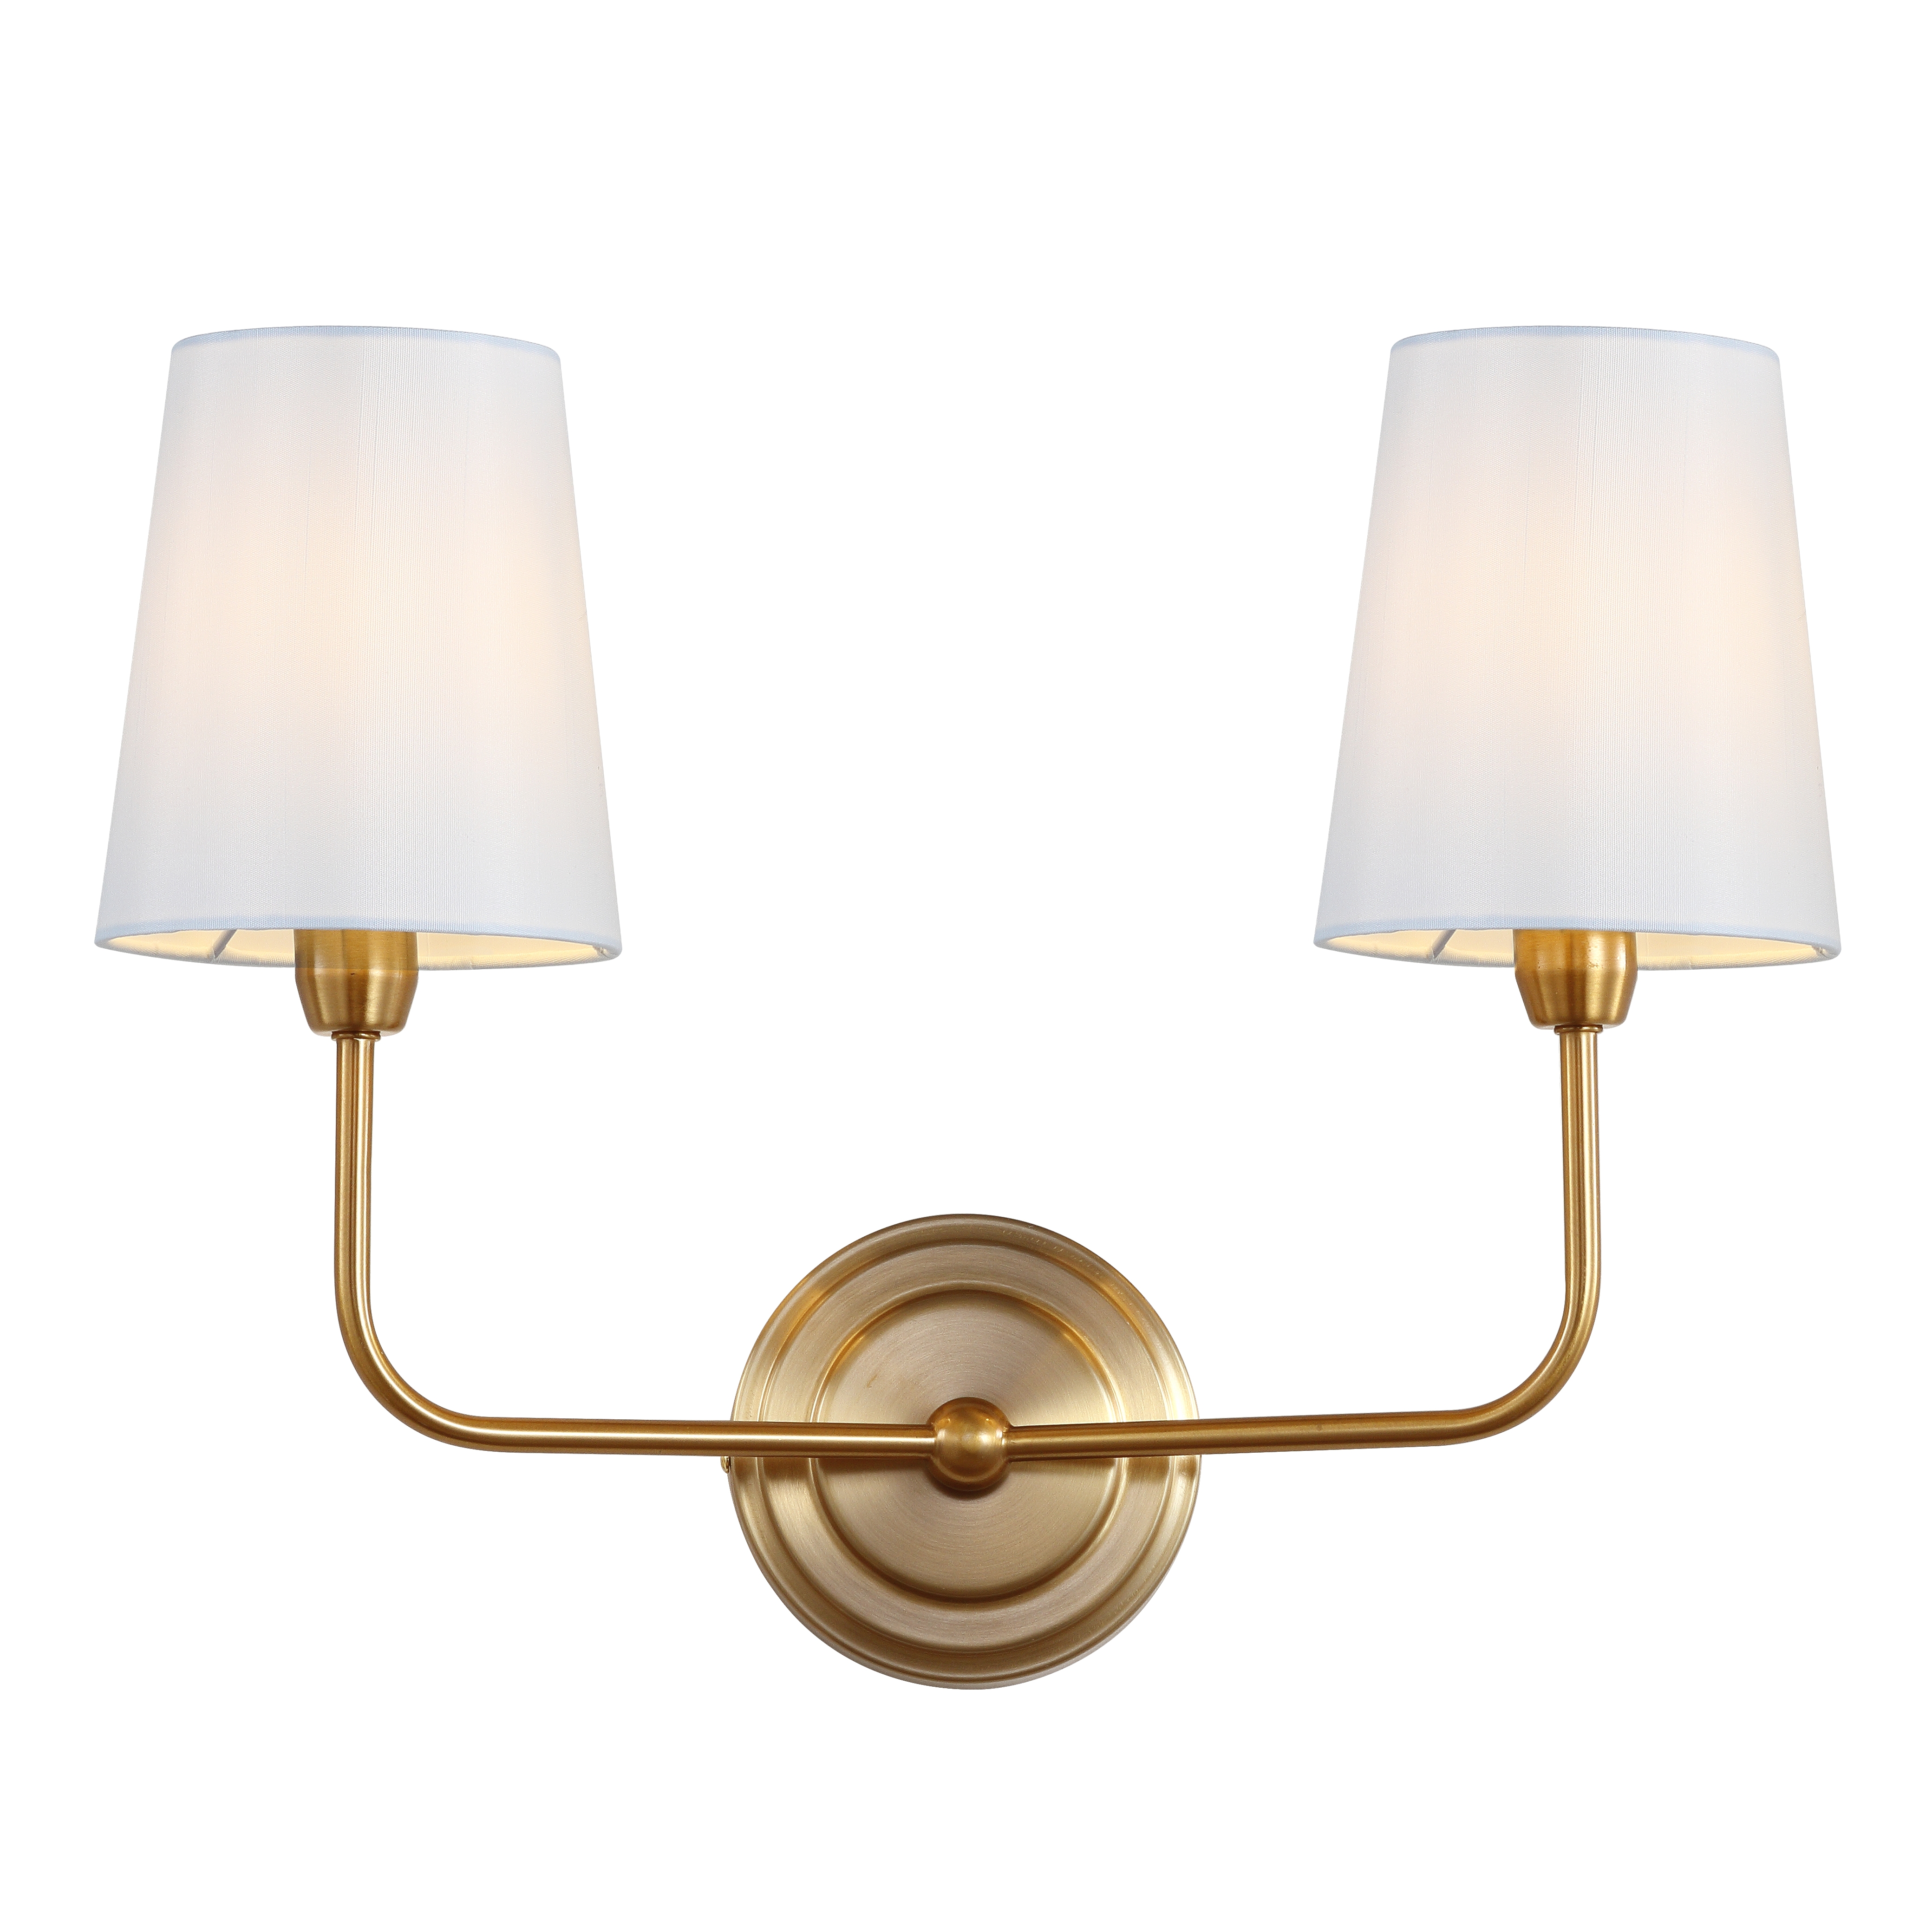 Ezra Two Light Wall Sconce - Brass/White Shade - Arlo Home - Image 0